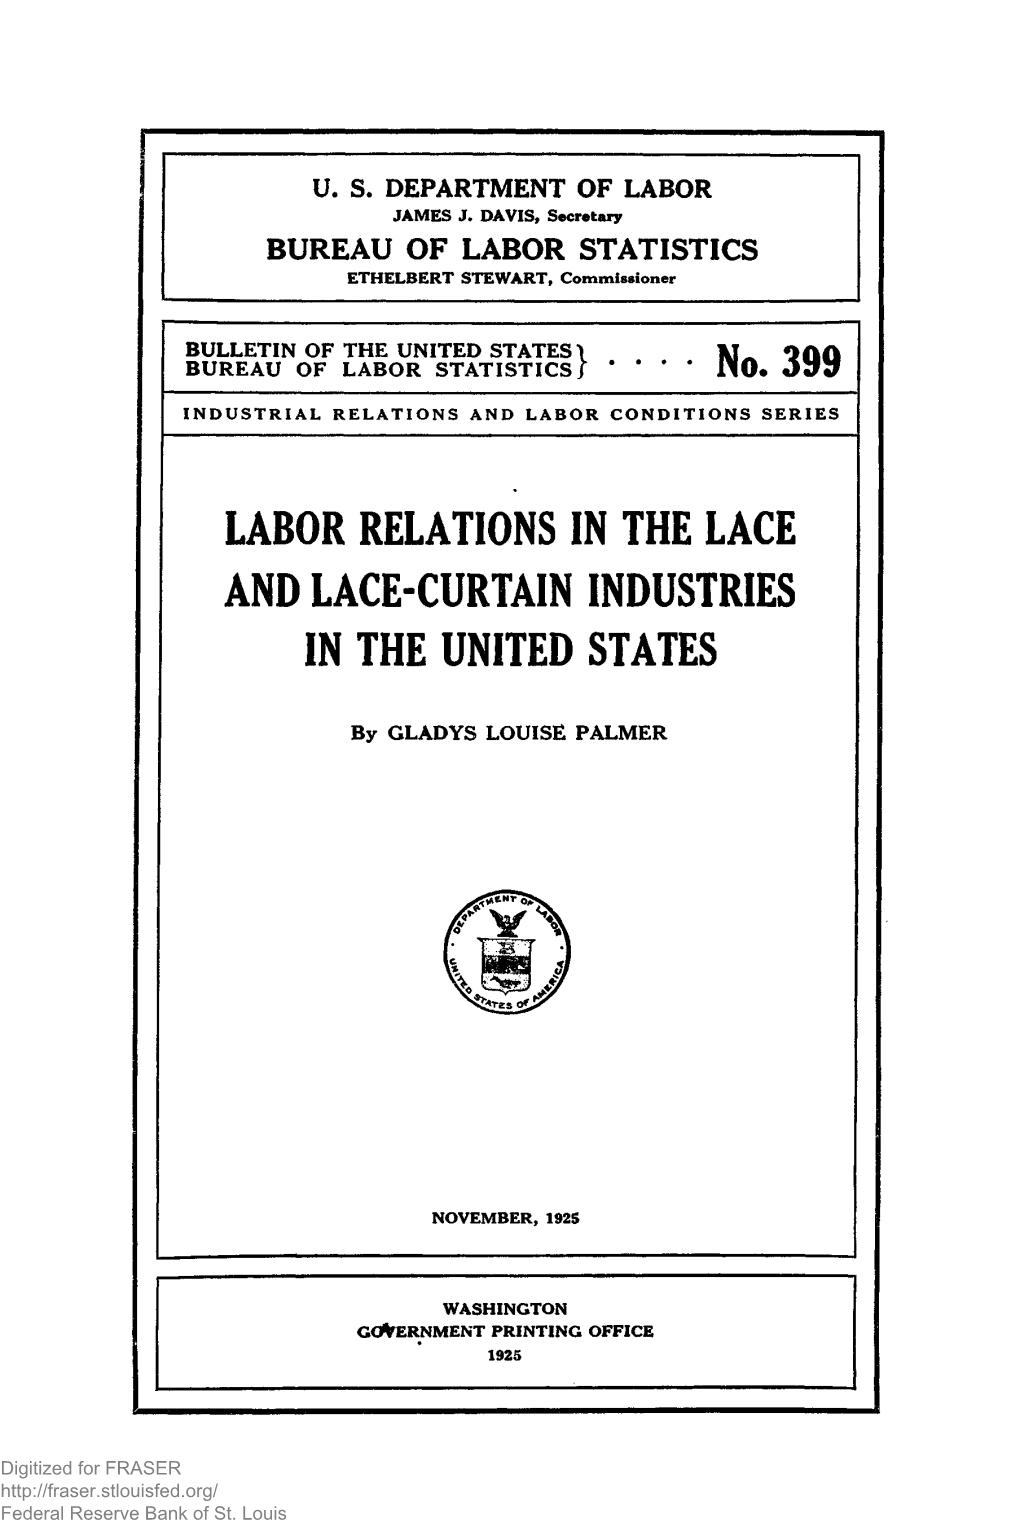 Labor Relations in the Lace and Lace-Curtain Industries in the United States